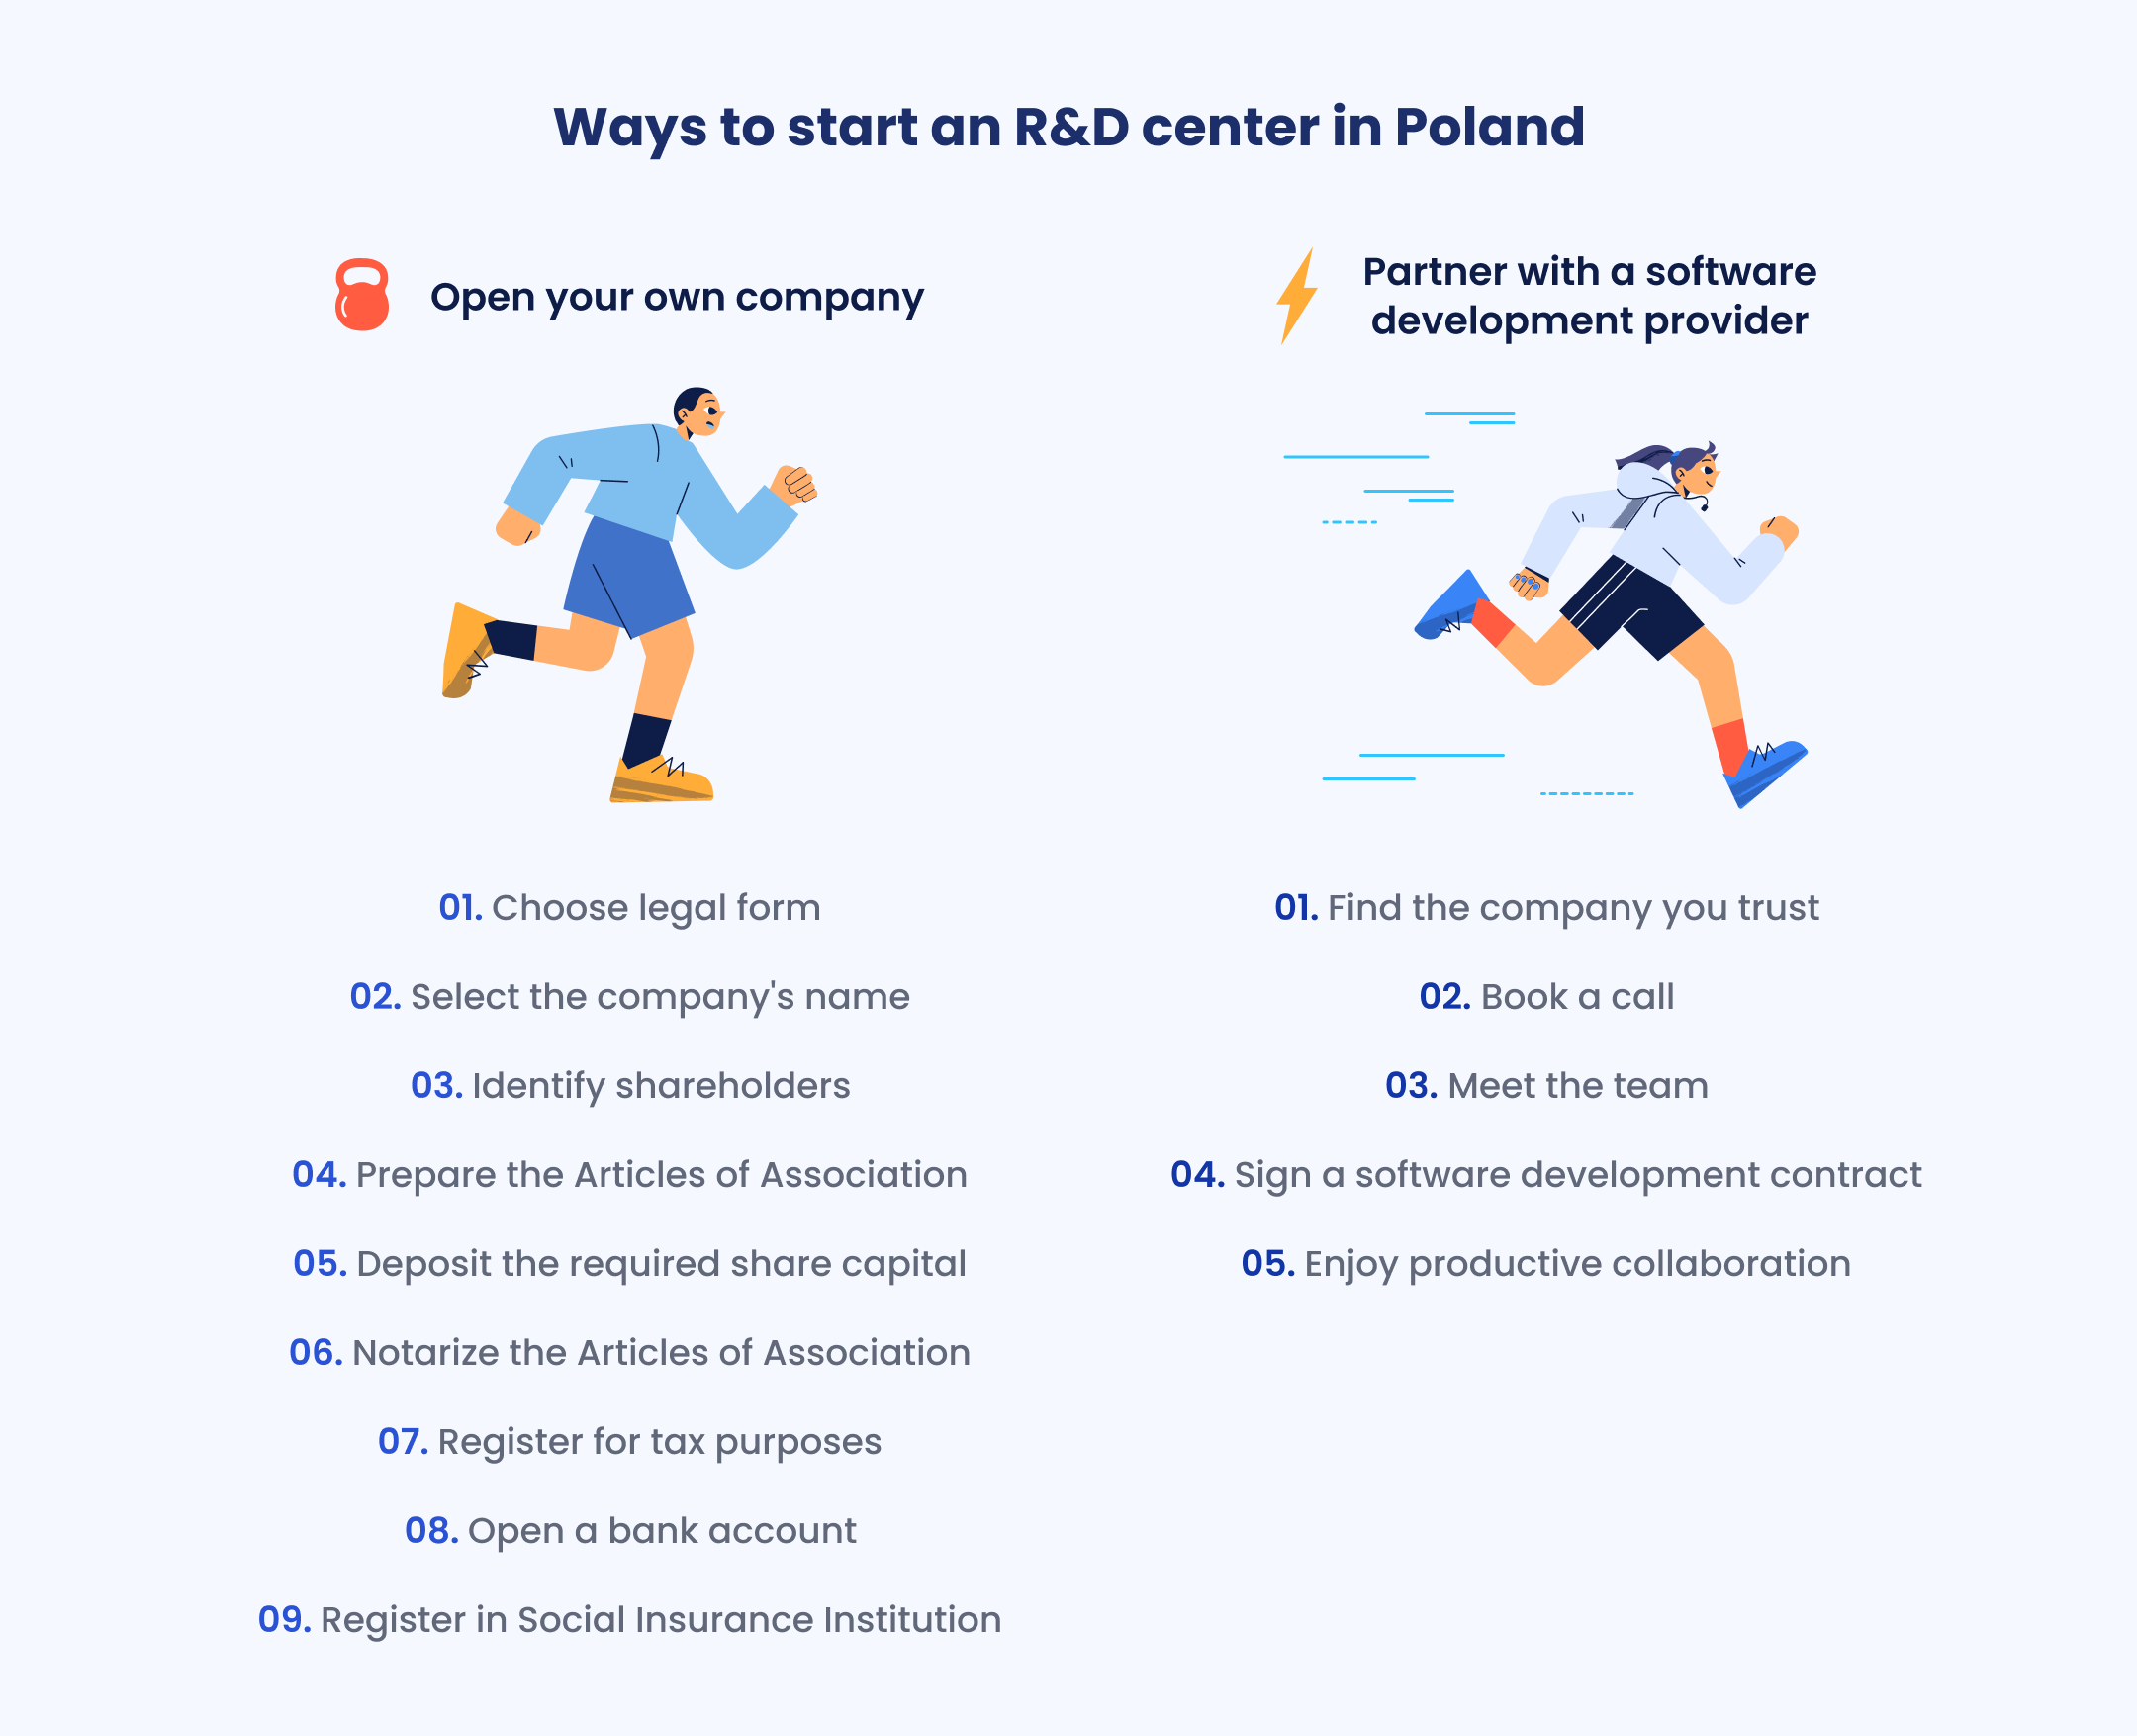 How to open an R&D center in Poland